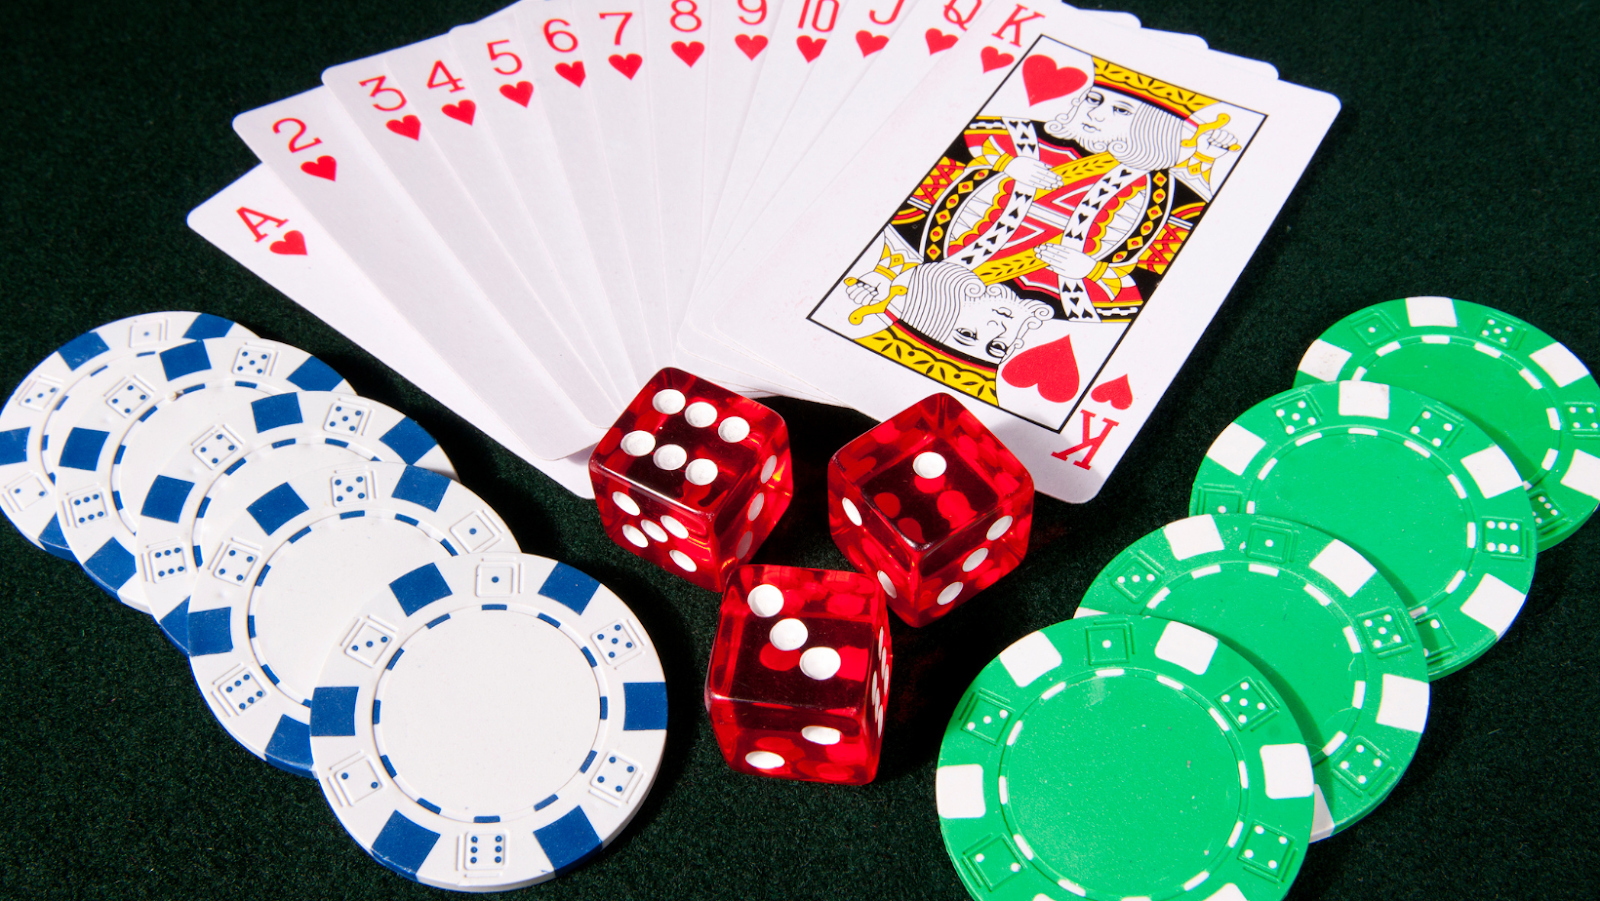 The Complete Process of Best Bitcoin Casinos